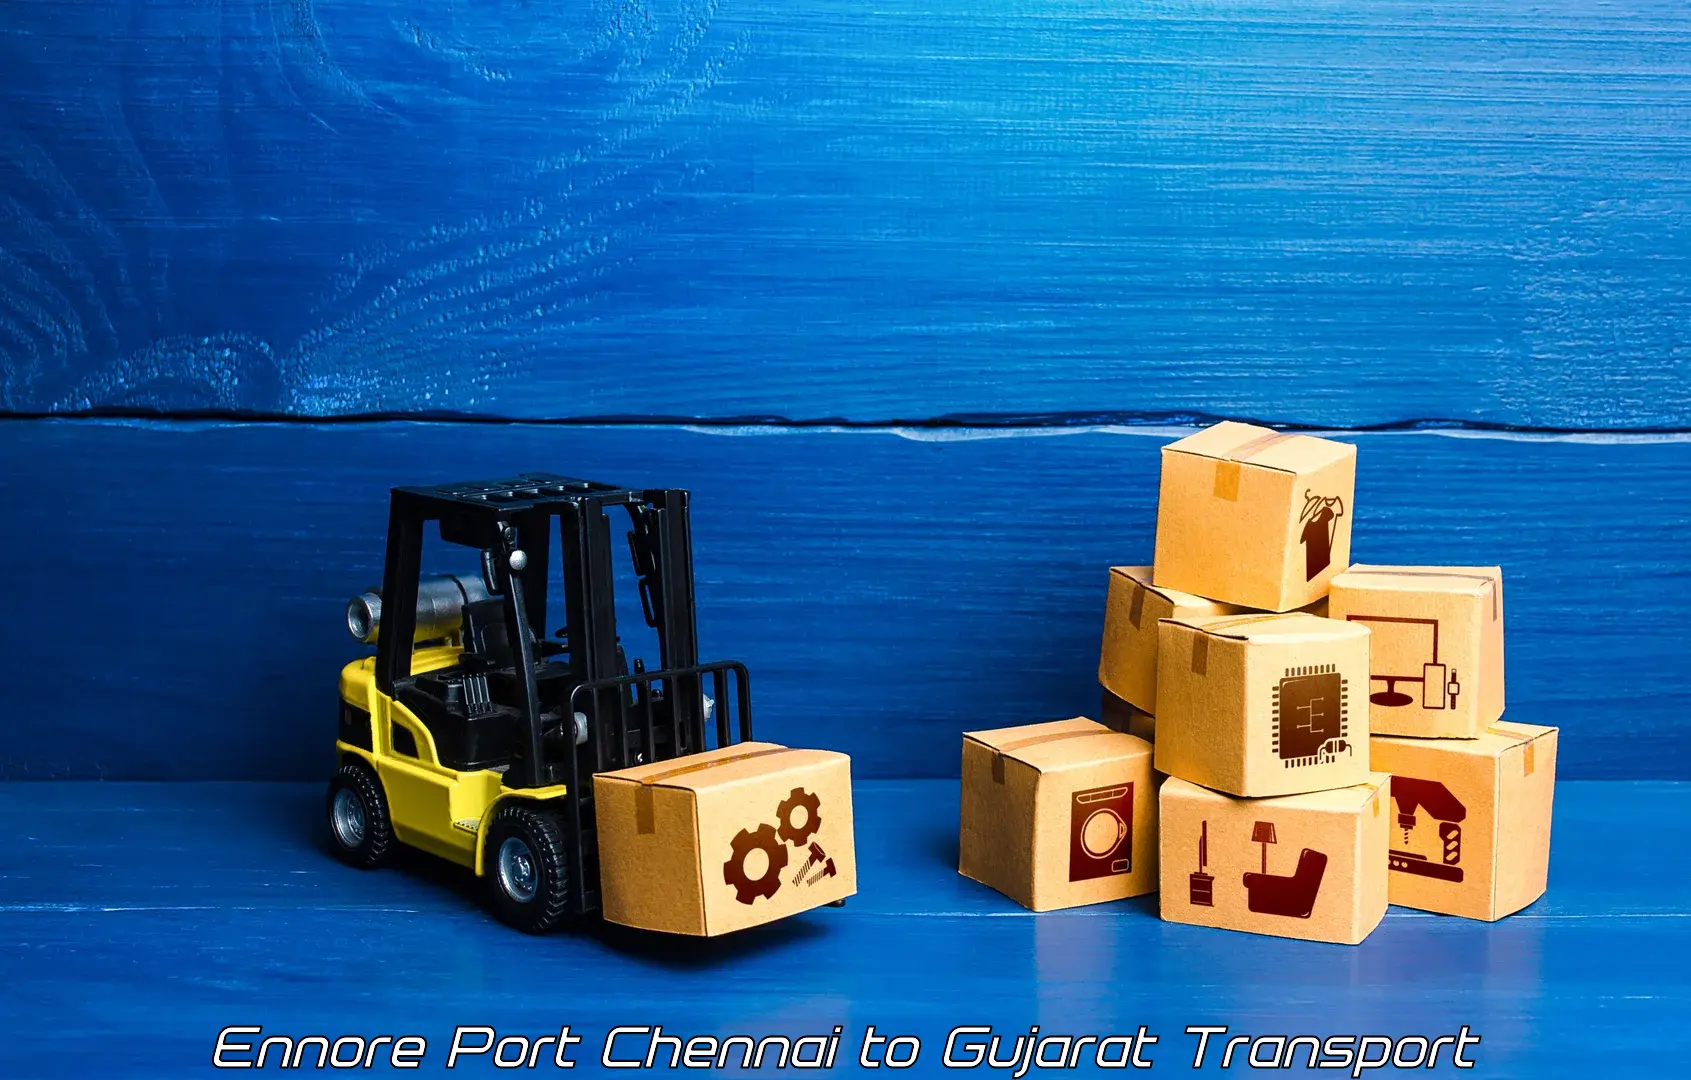 Road transport services Ennore Port Chennai to Gujarat